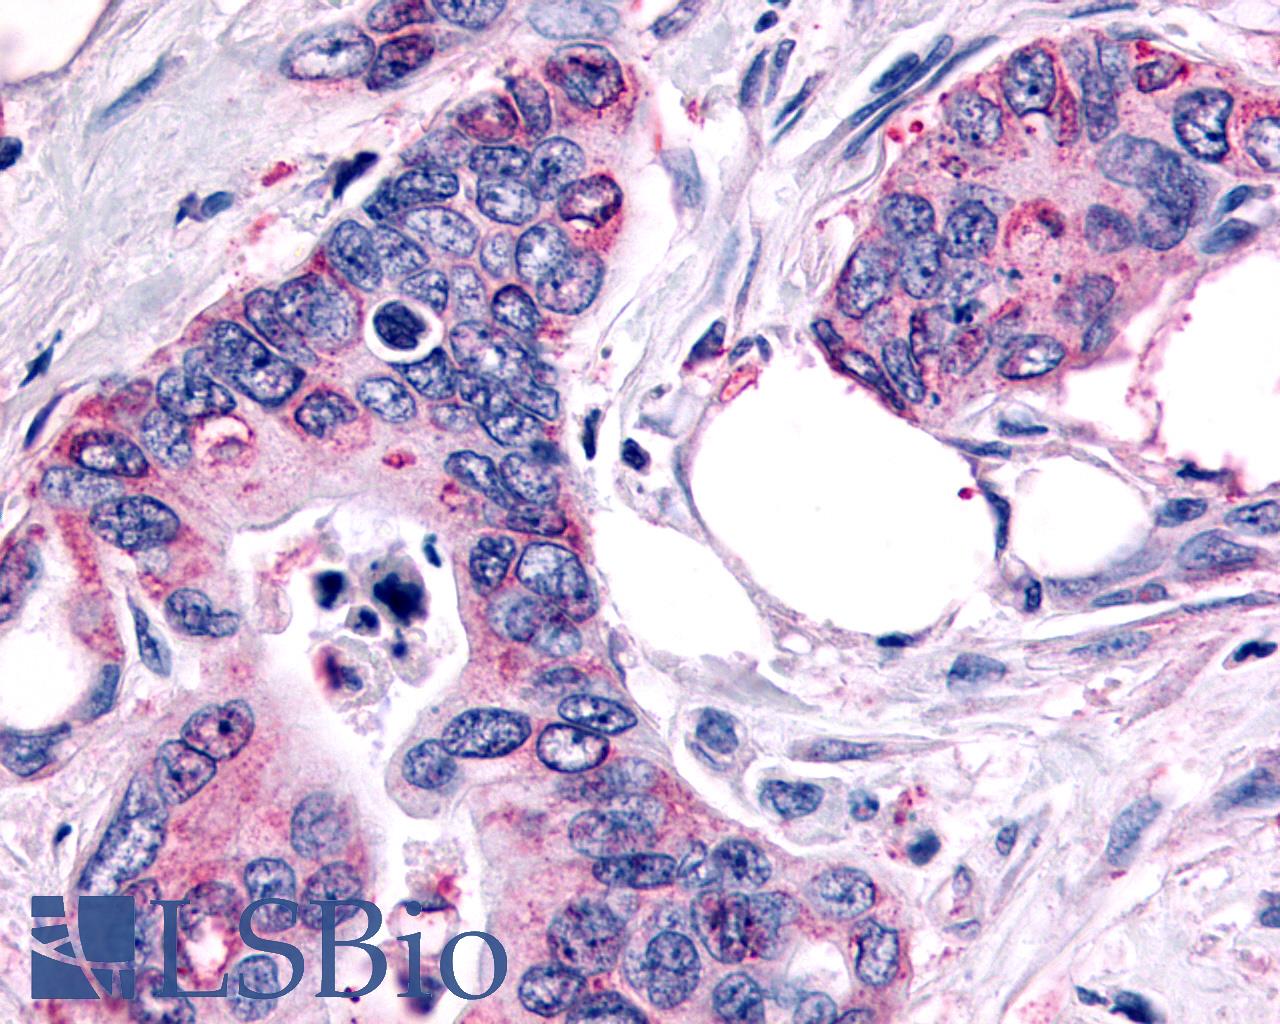 FZD10 / Frizzled 10 Antibody - Anti-FZD10 / Frizzled 10 antibody IHC of human Pancreas, Carcinoma. Immunohistochemistry of formalin-fixed, paraffin-embedded tissue after heat-induced antigen retrieval.